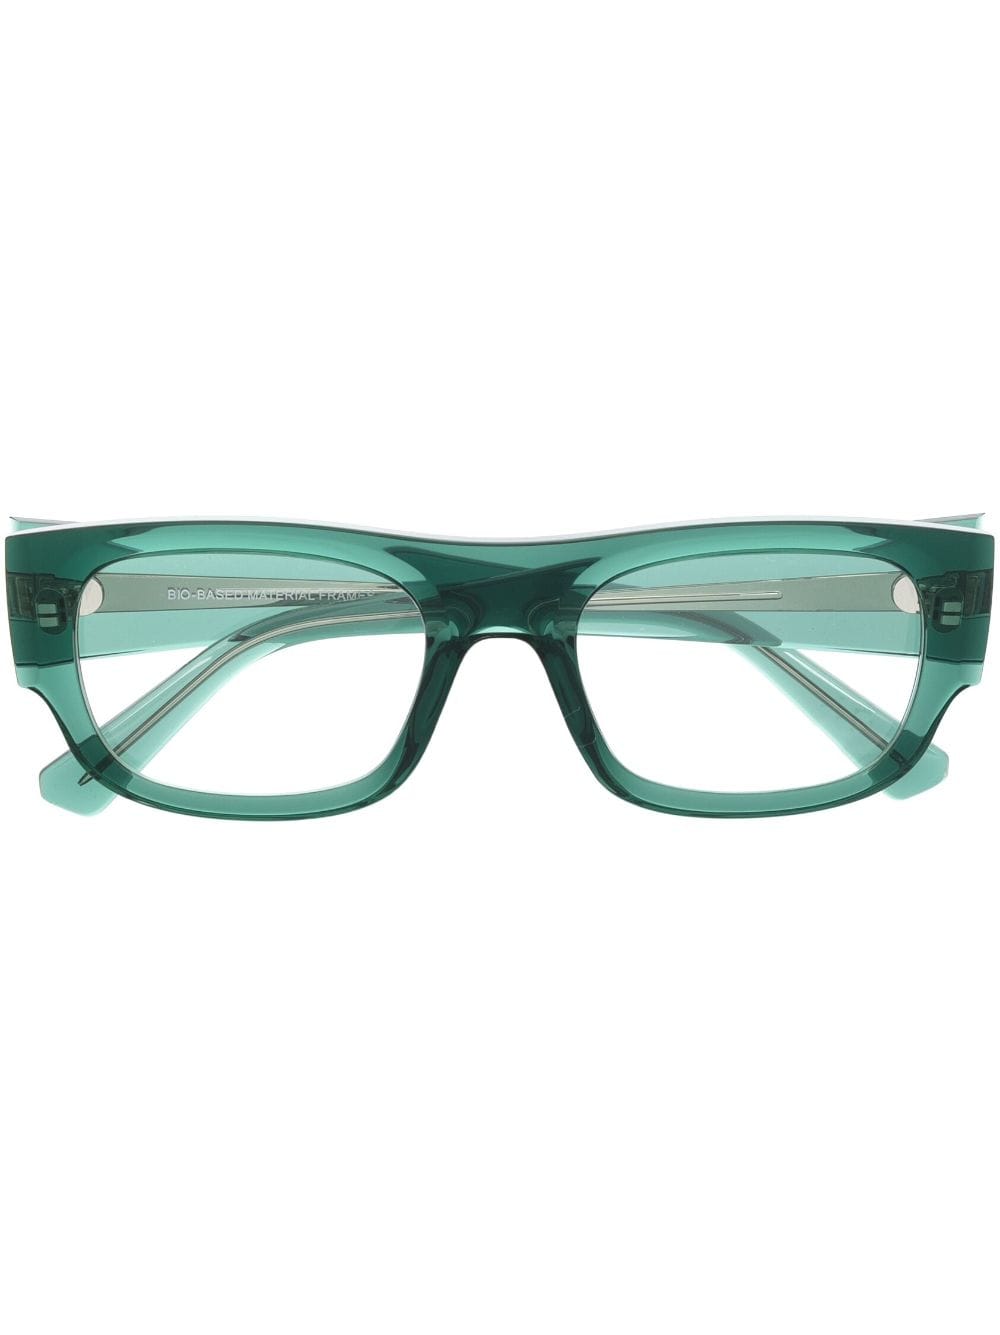 Ray-Ban rectangle-frame clear-lenses glasses - Green von Ray-Ban